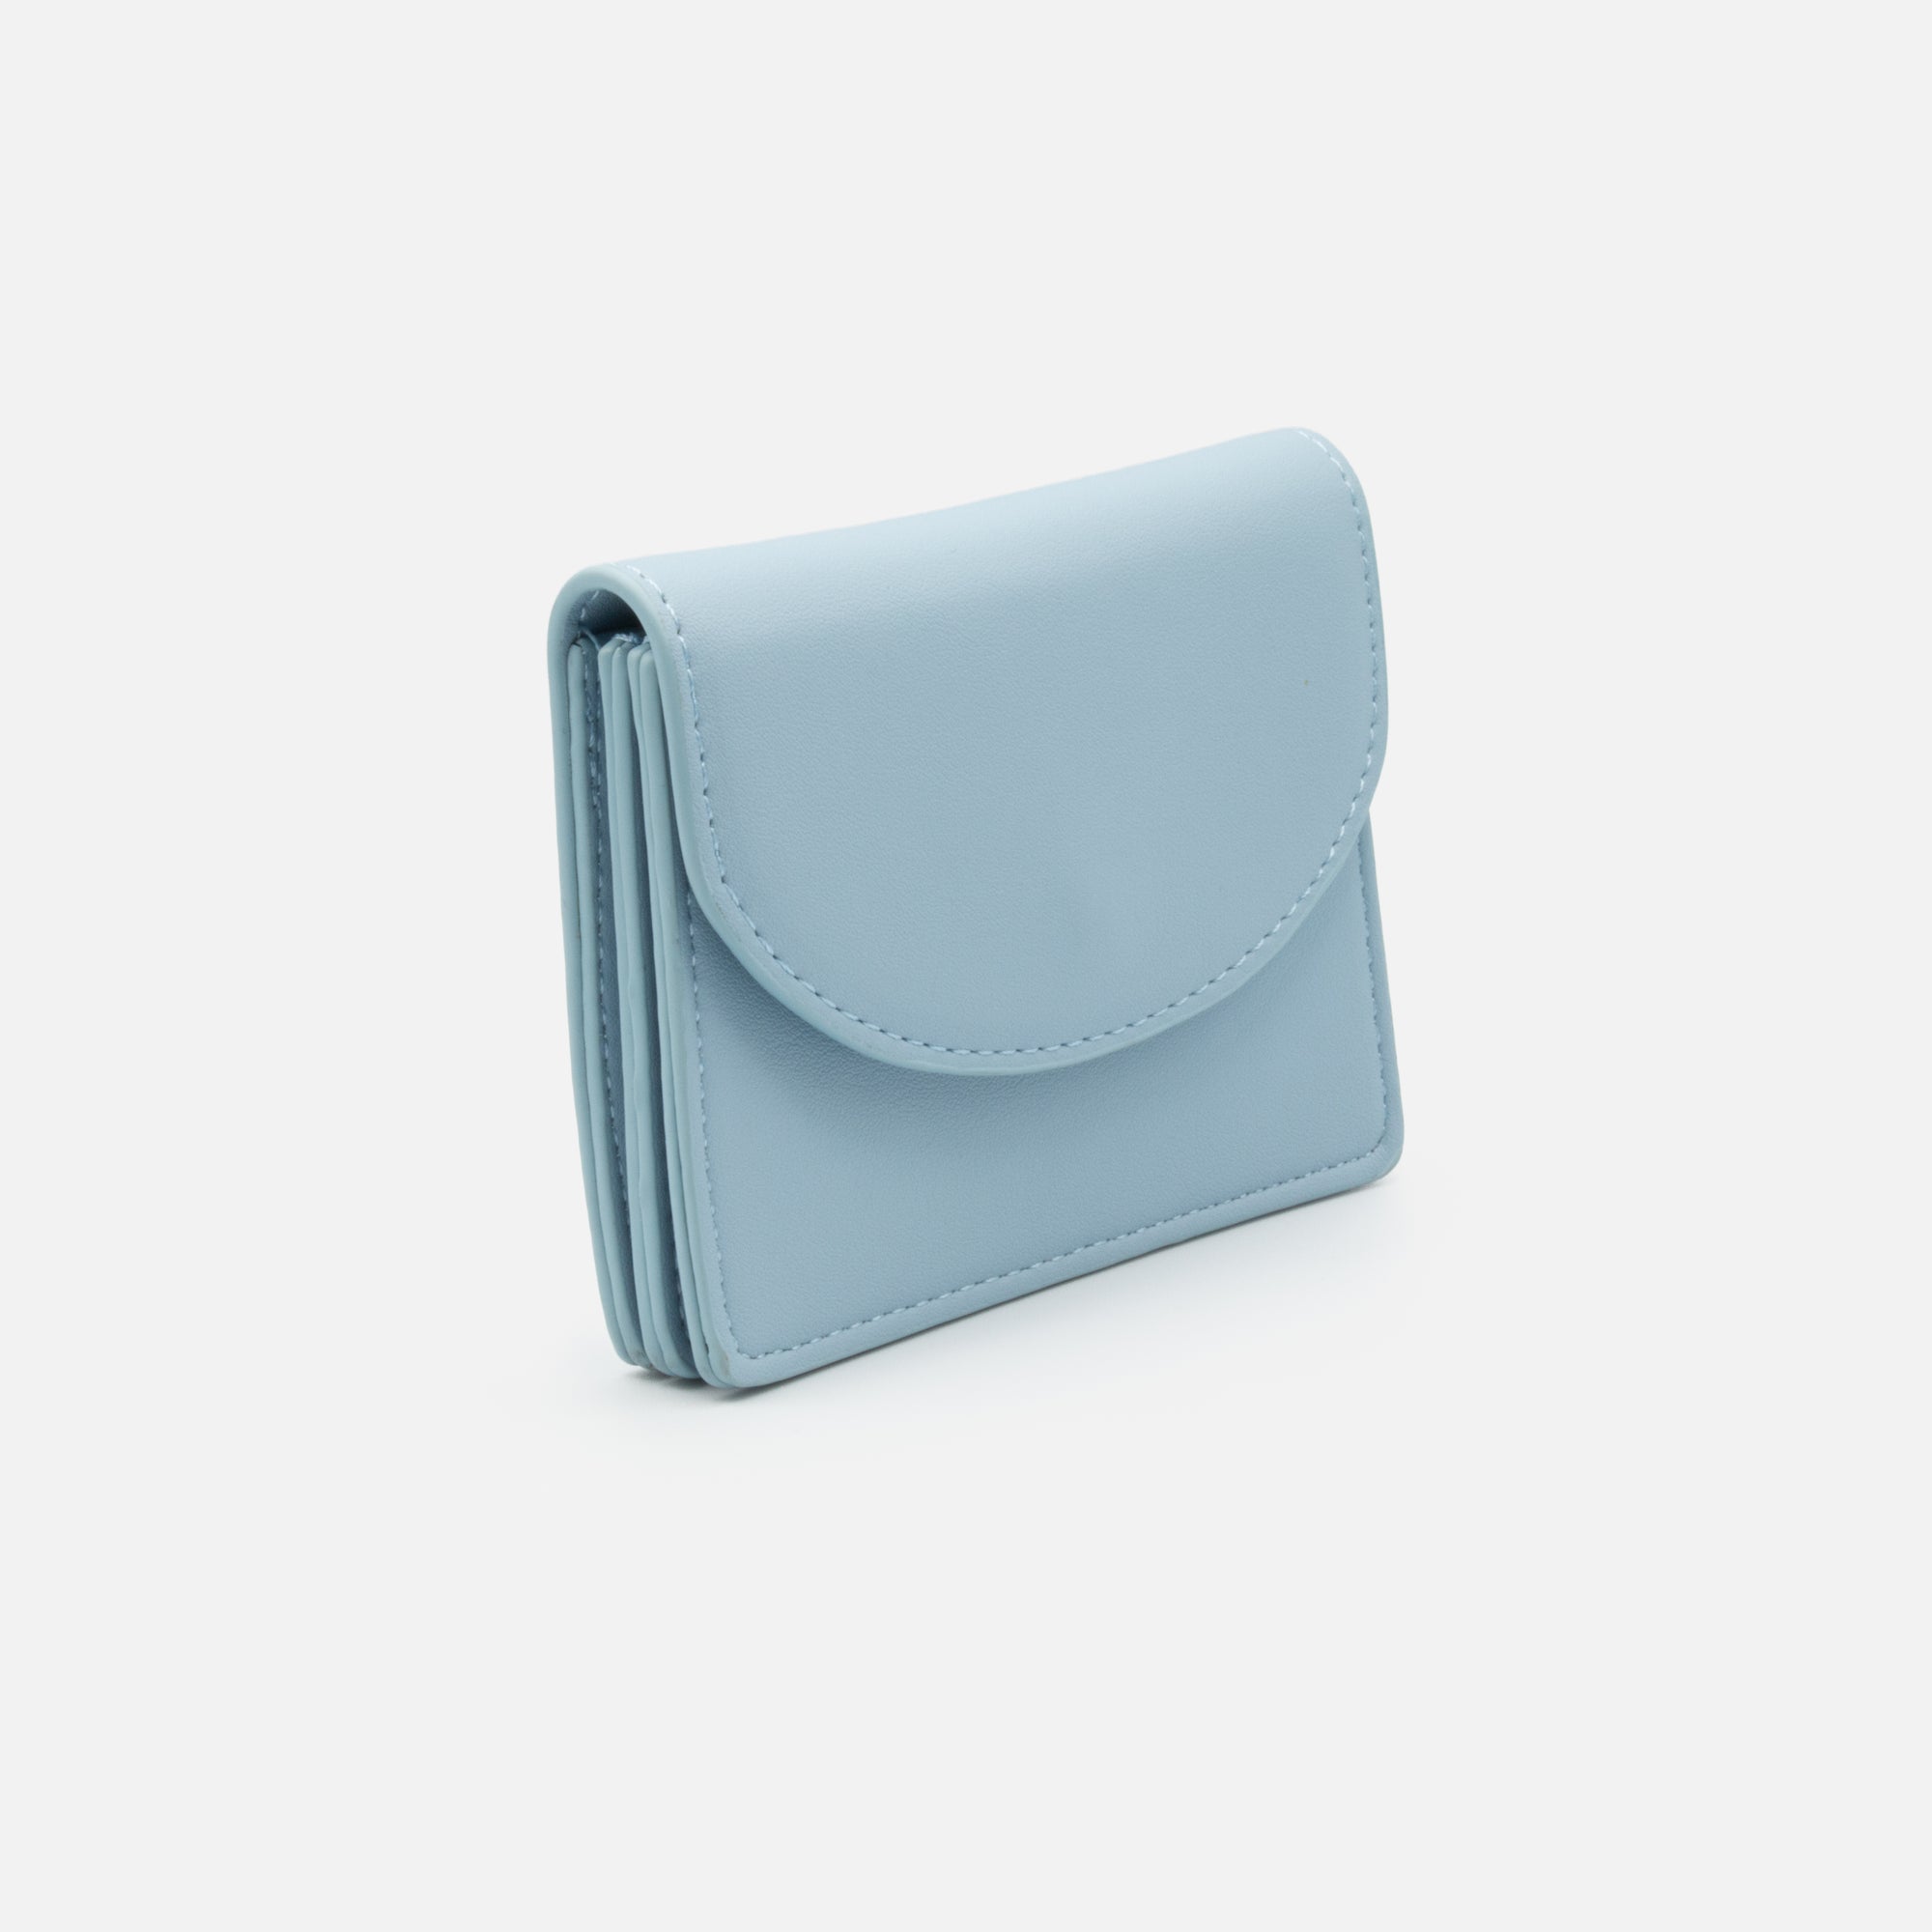 Pale blue card holder with flap